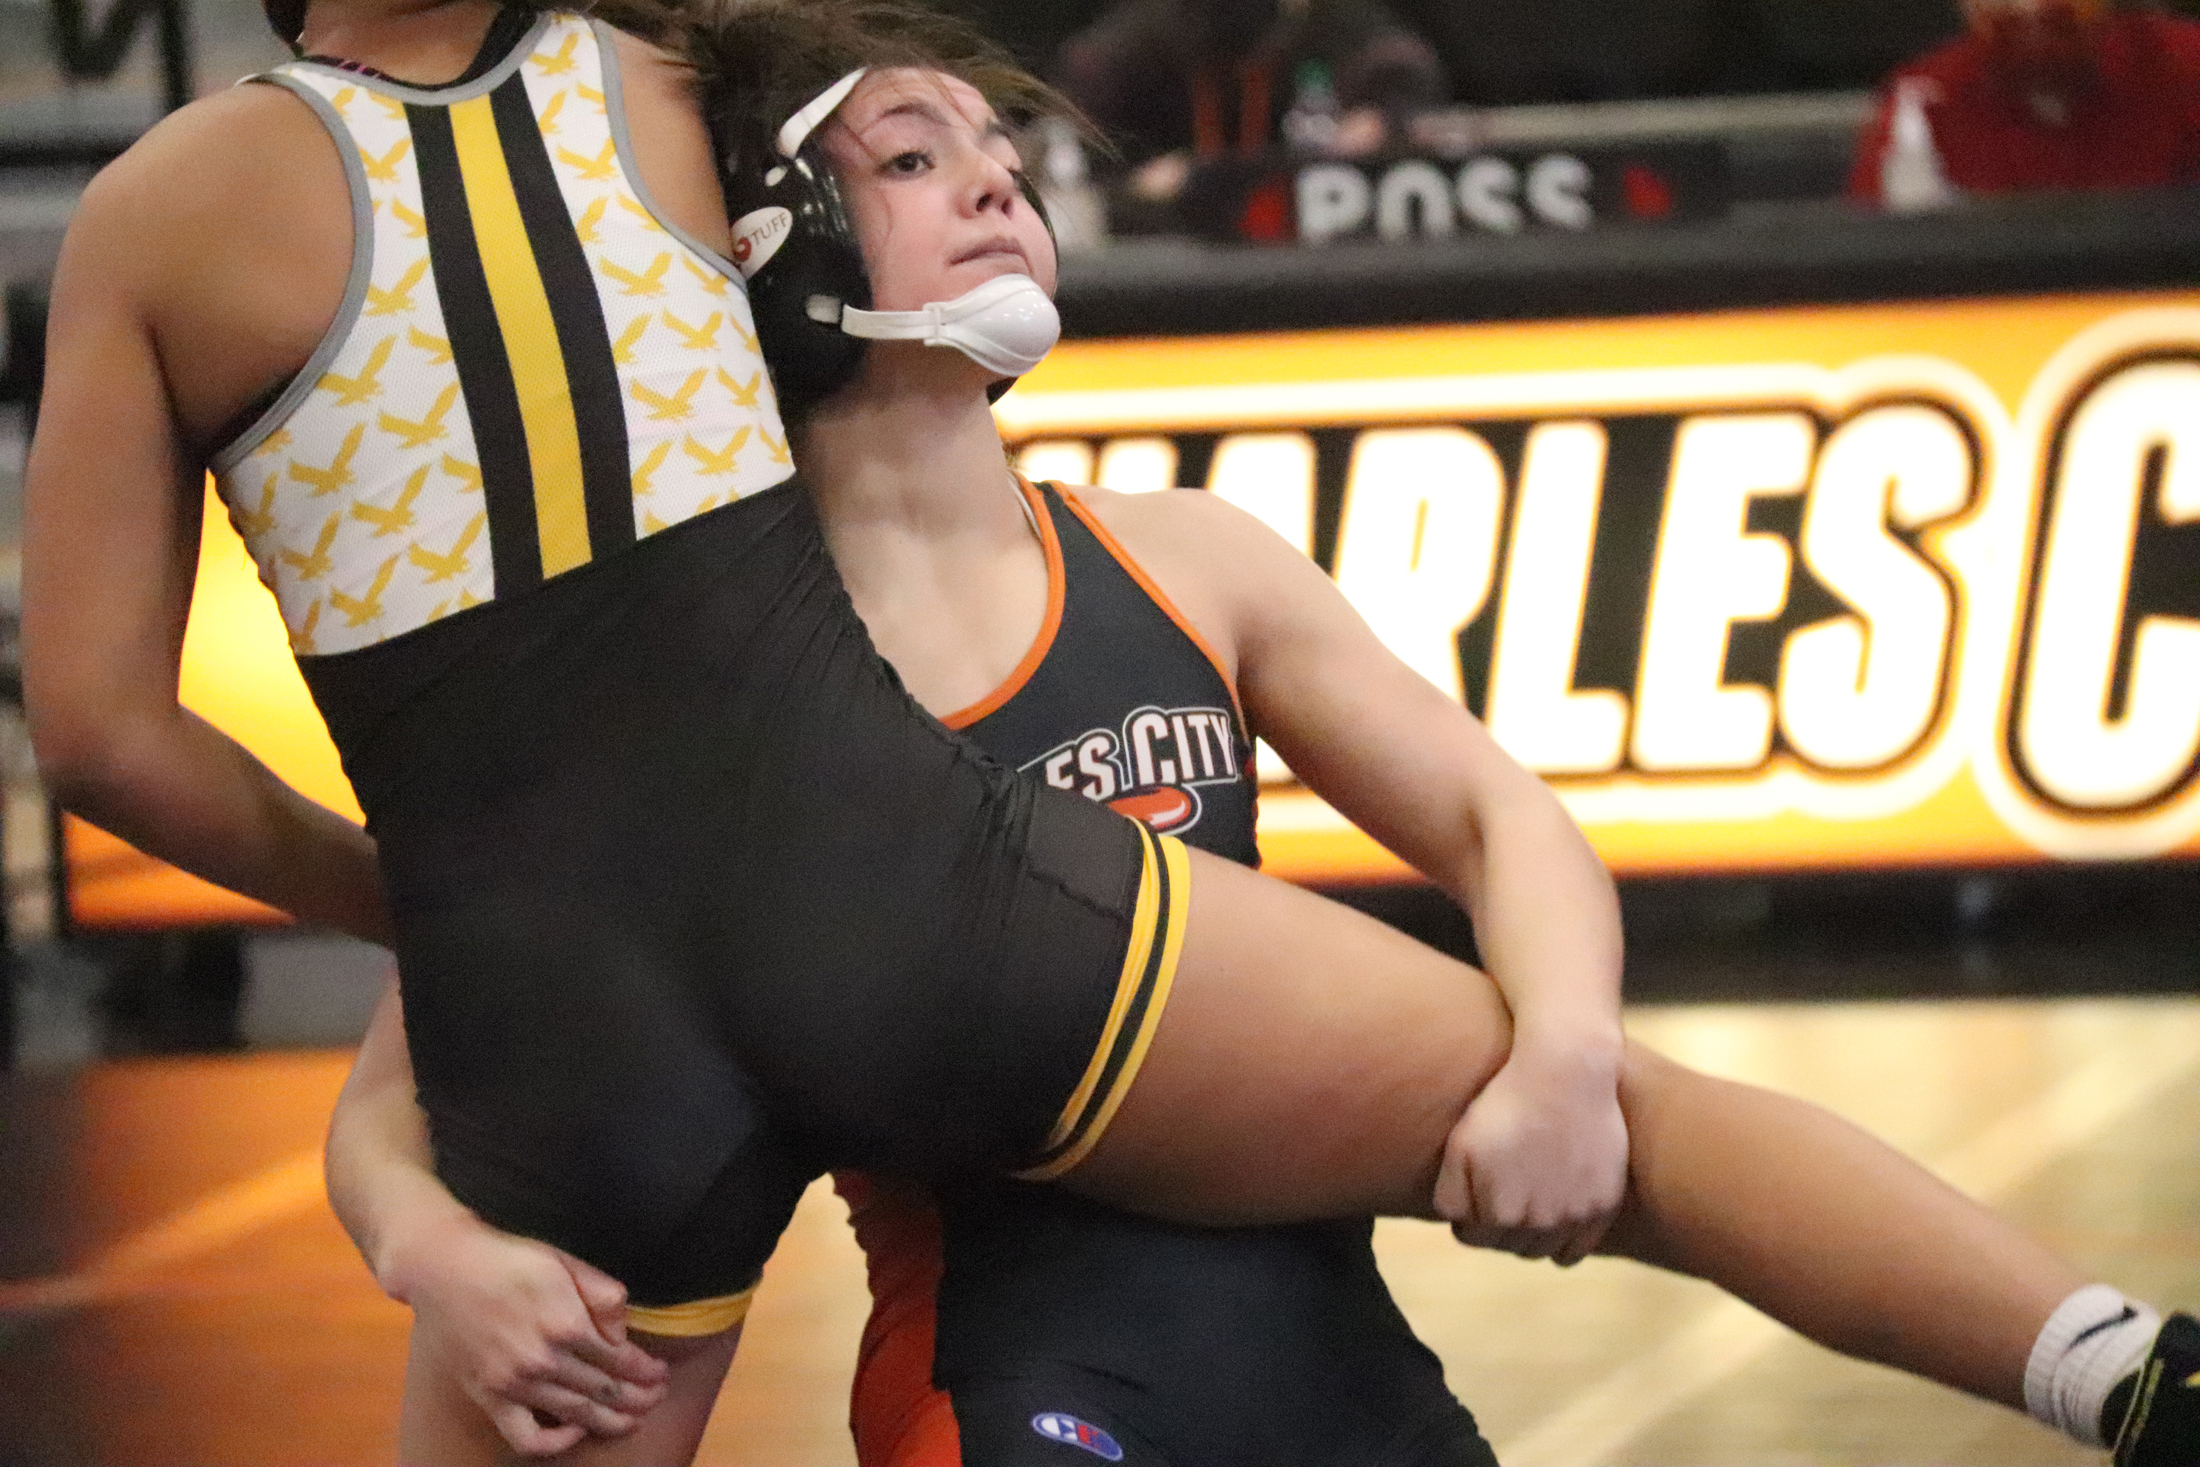 Connell, Luft win state wrestling titles; Comet girls place 6th